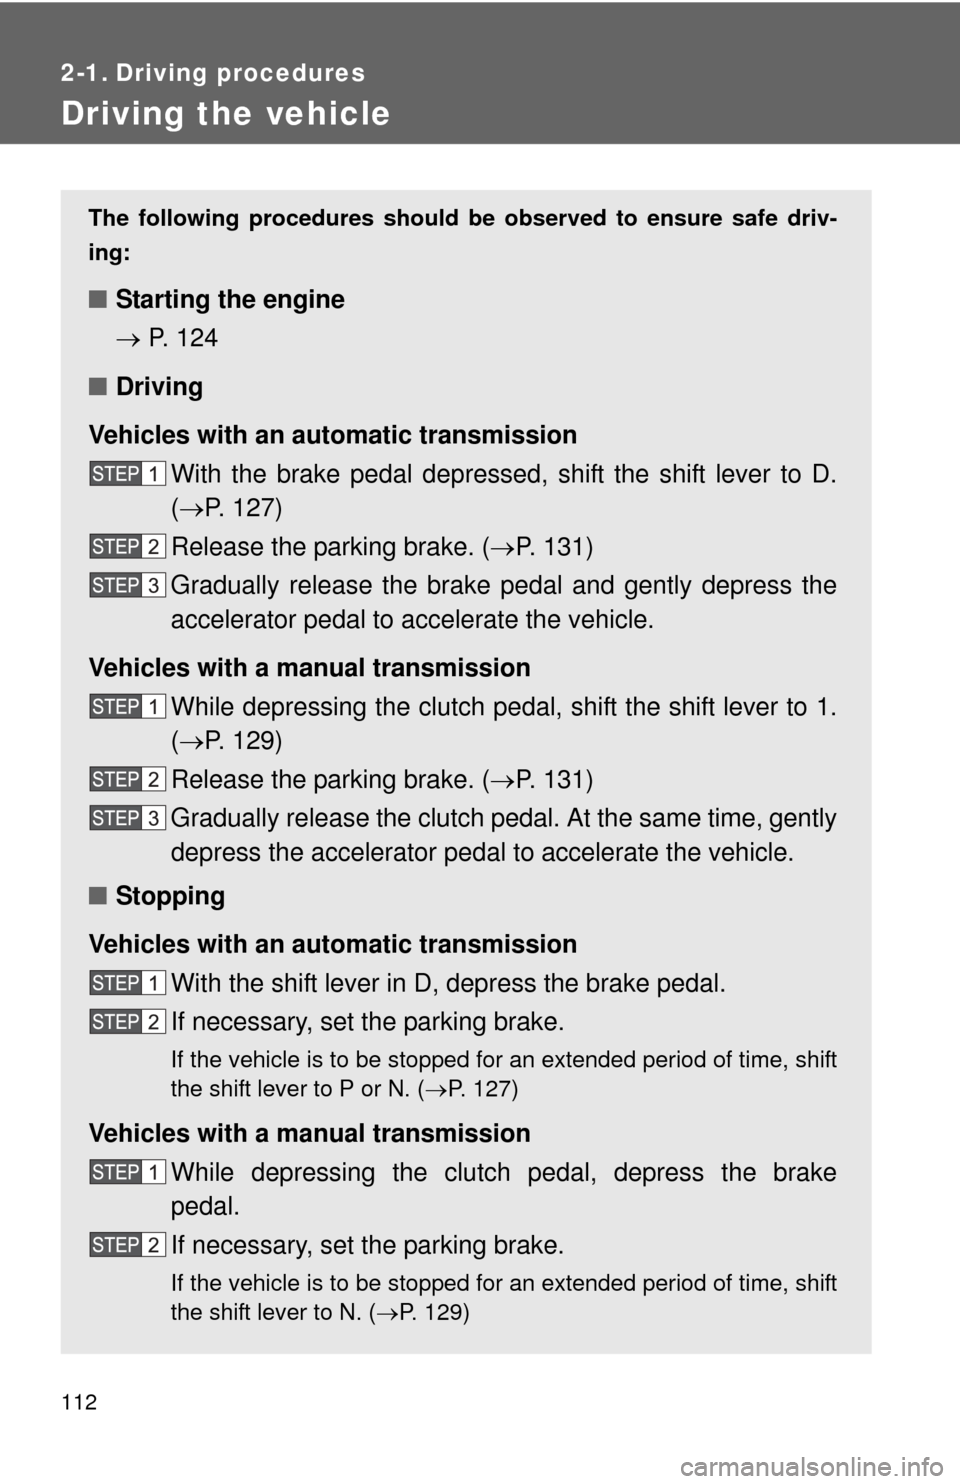 TOYOTA YARIS 2013 3.G Owners Manual 112
2-1. Driving procedures
Driving the vehicle
The following procedures should be observed to ensure safe driv-
ing:
■ Starting the engine
 P.  1 2 4
■ Driving
Vehicles with an au tomatic tran